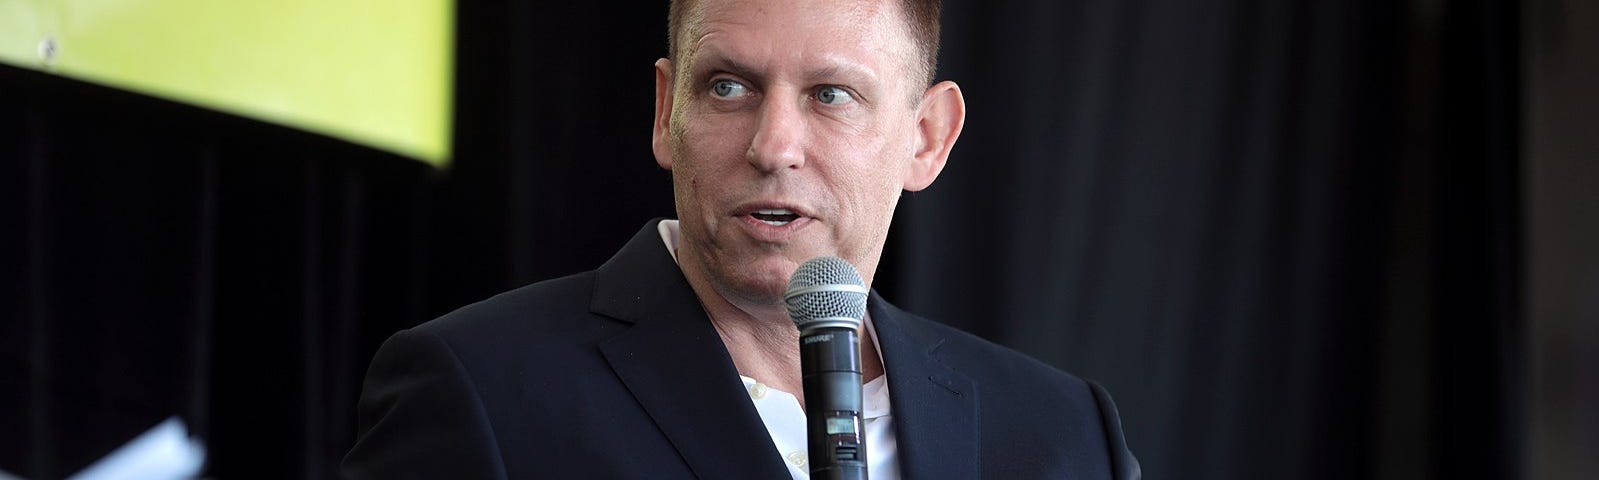 Gay billionaire Peter Thiel defends backing anti-LGBTQ candidates, claiming he fears public will see financial benefits of homosexuality.